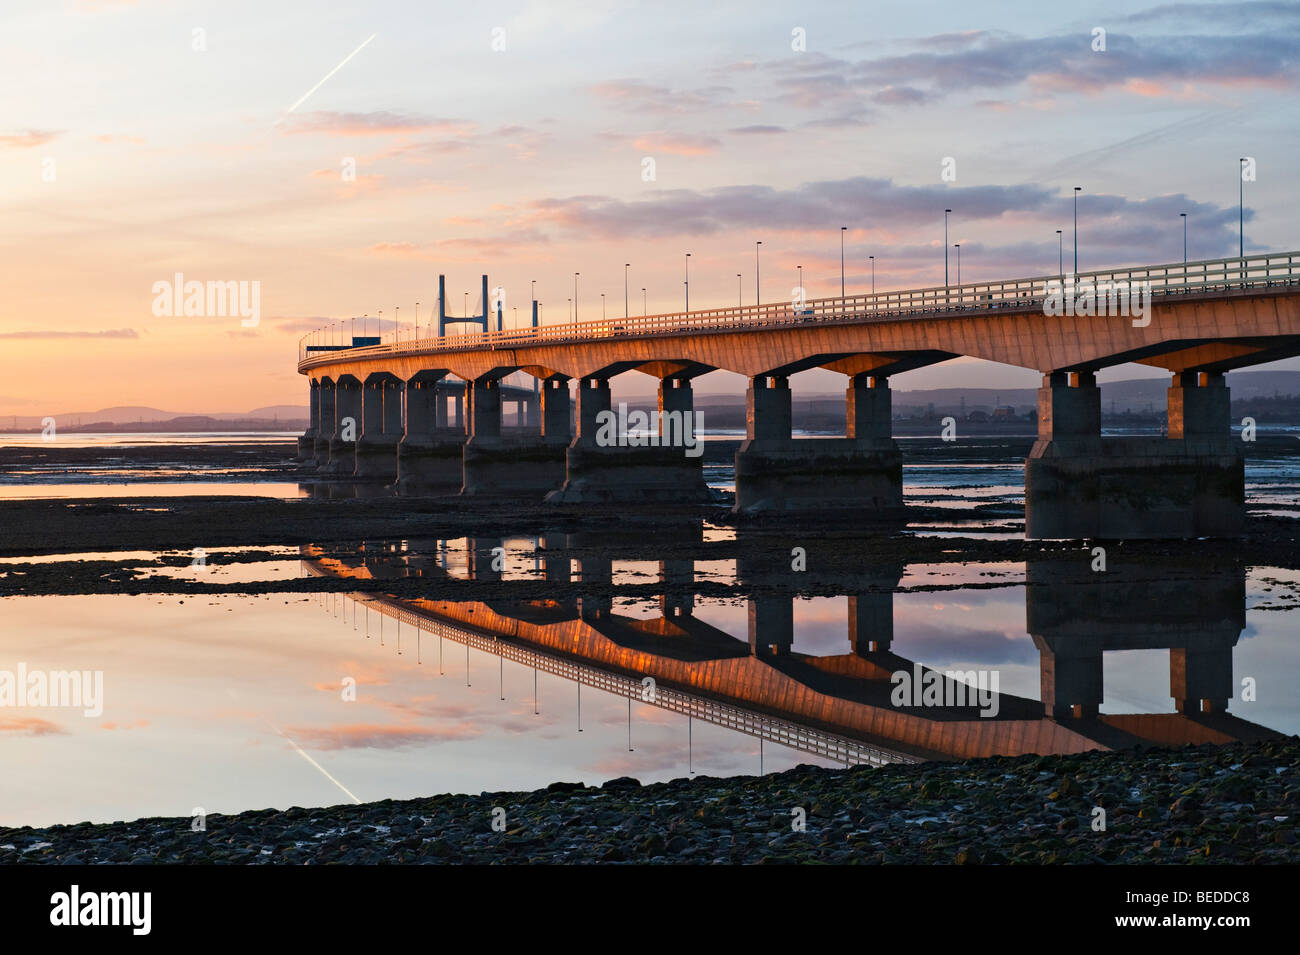 A sunset view of the Second Severn Crossing motorway bridge, Bristol, UK, seen from Aust on the English side of the Severn estuary Stock Photo